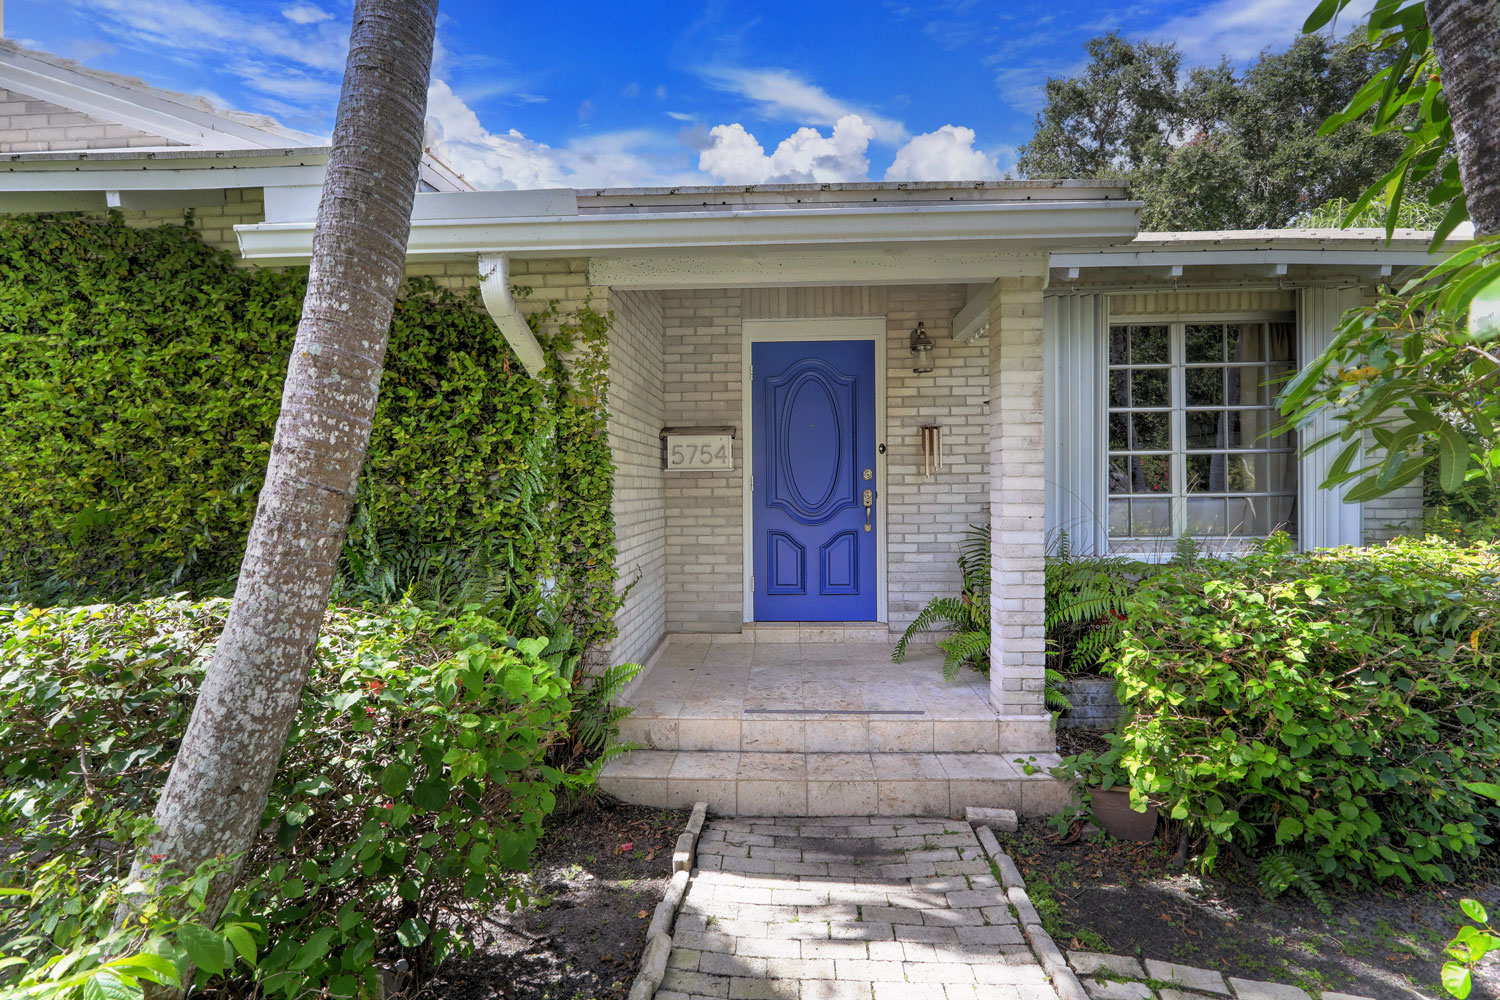 South Miami Home for Sale